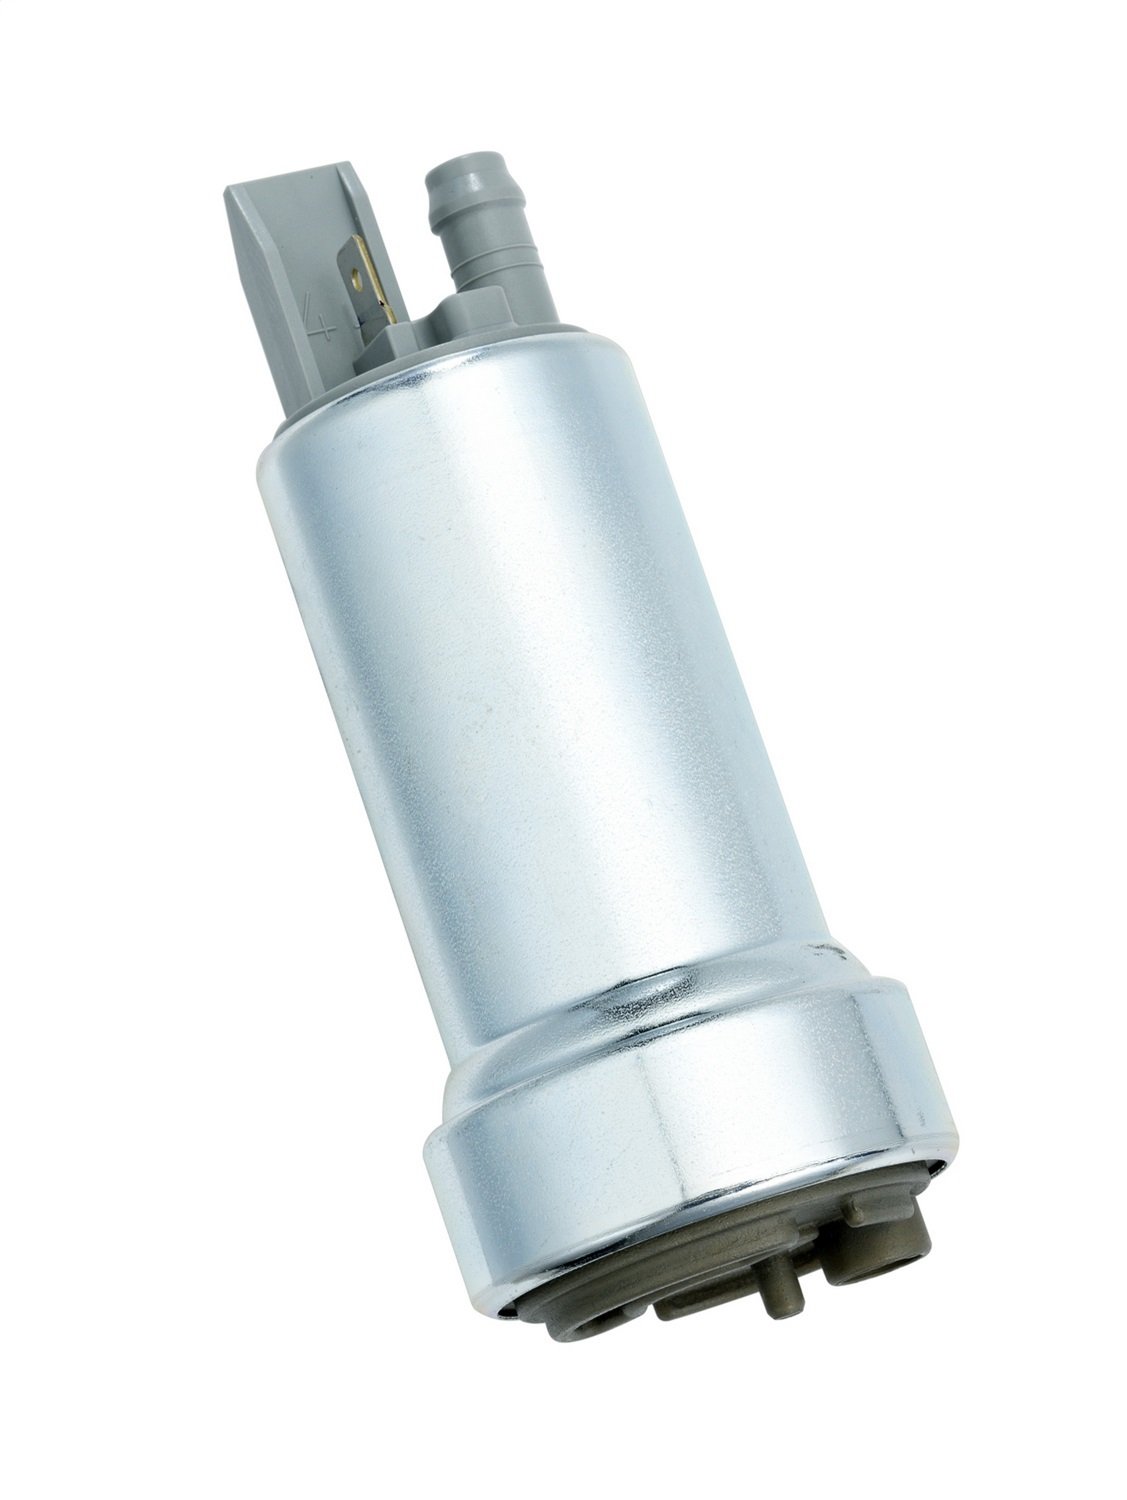 Universal In-Tank Electric Fuel Pump Flows 92 GPH at 40 psi